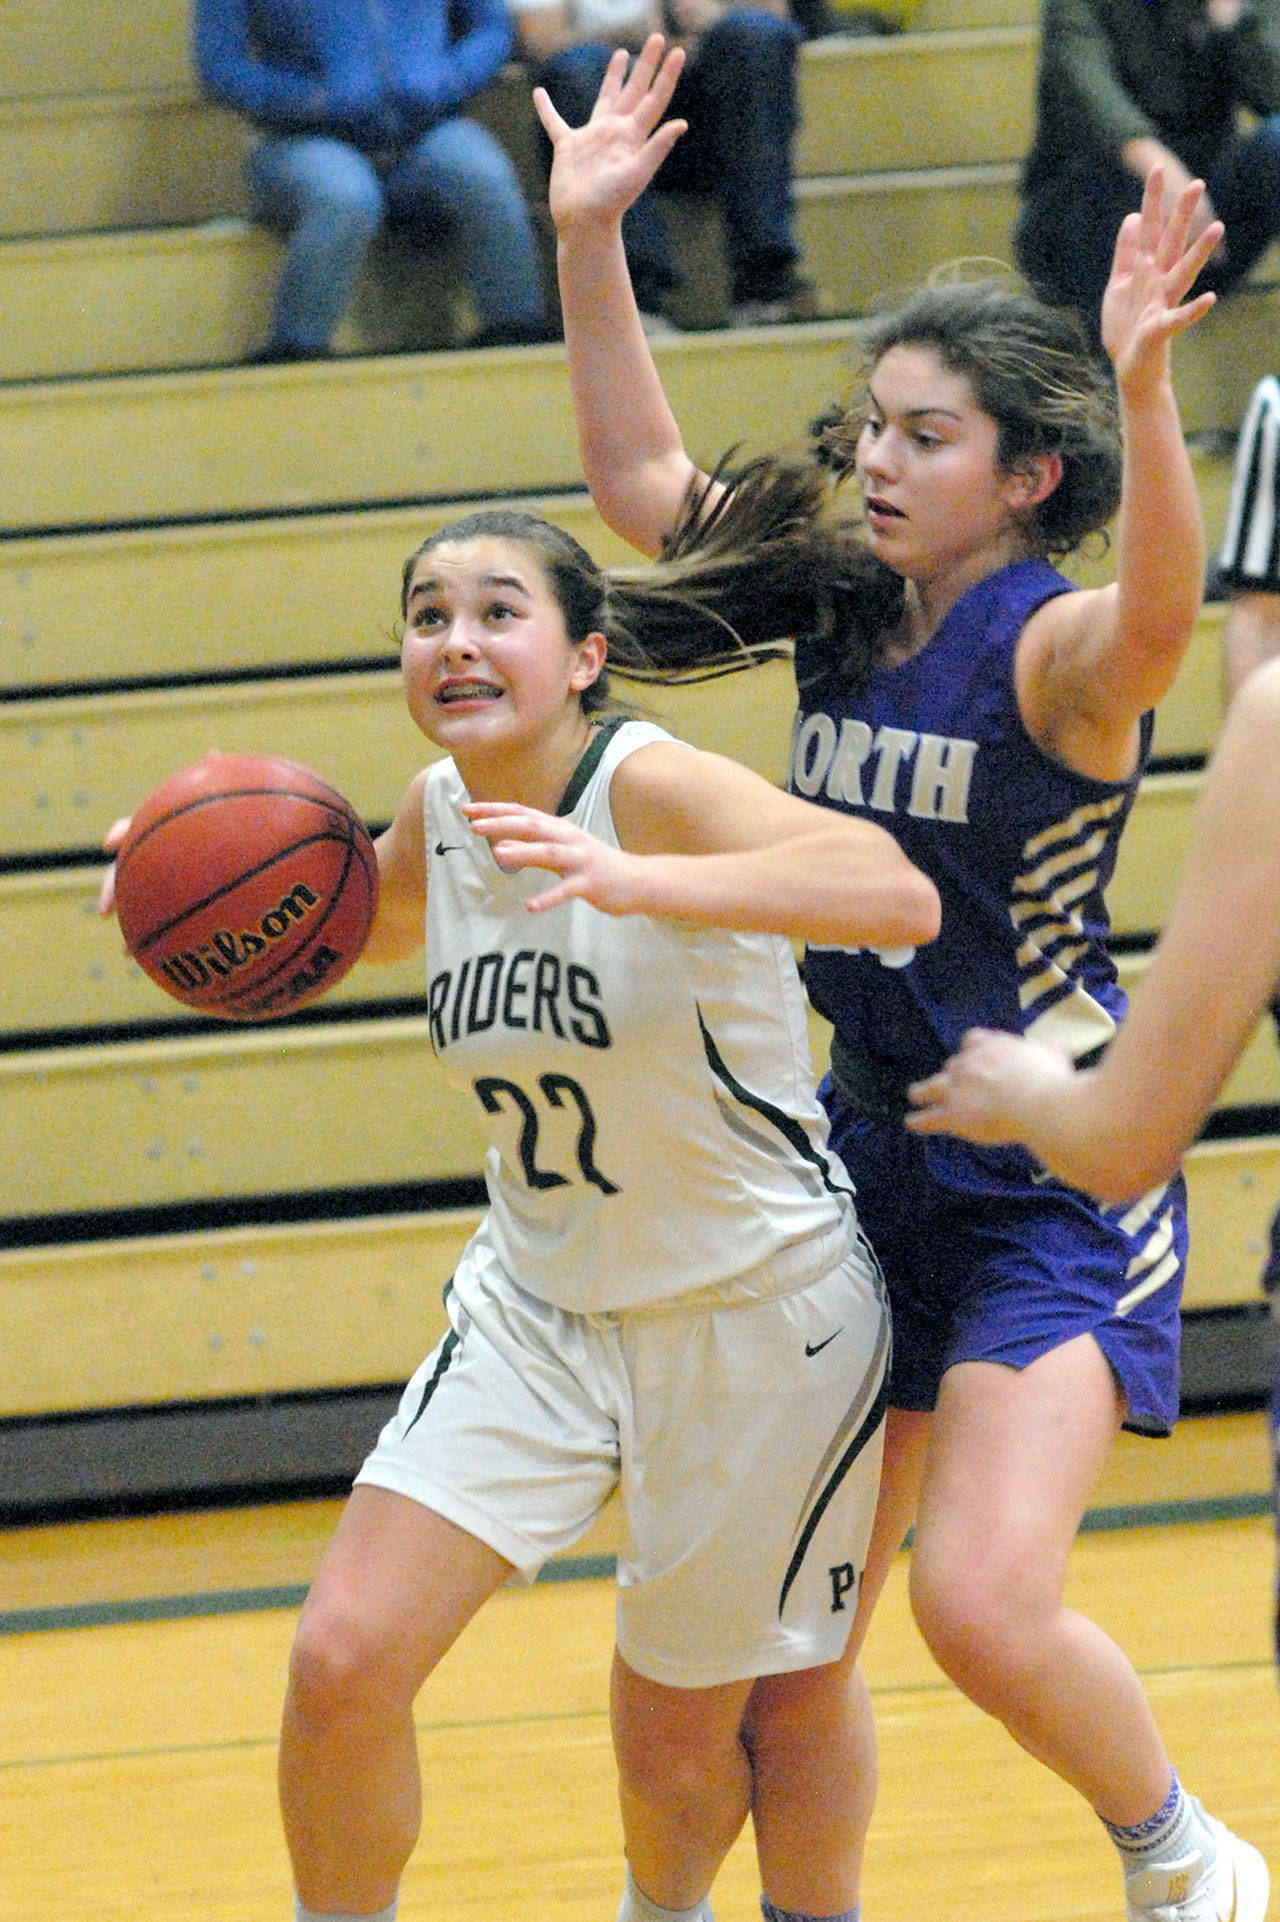 Keith Thorpe/Peninsula Daily News Port Angeles’ Eve Burke, left, drives to the lane as North Kitsap’s Elizabeth Kimmel defends on Friday night in Port Angeles.